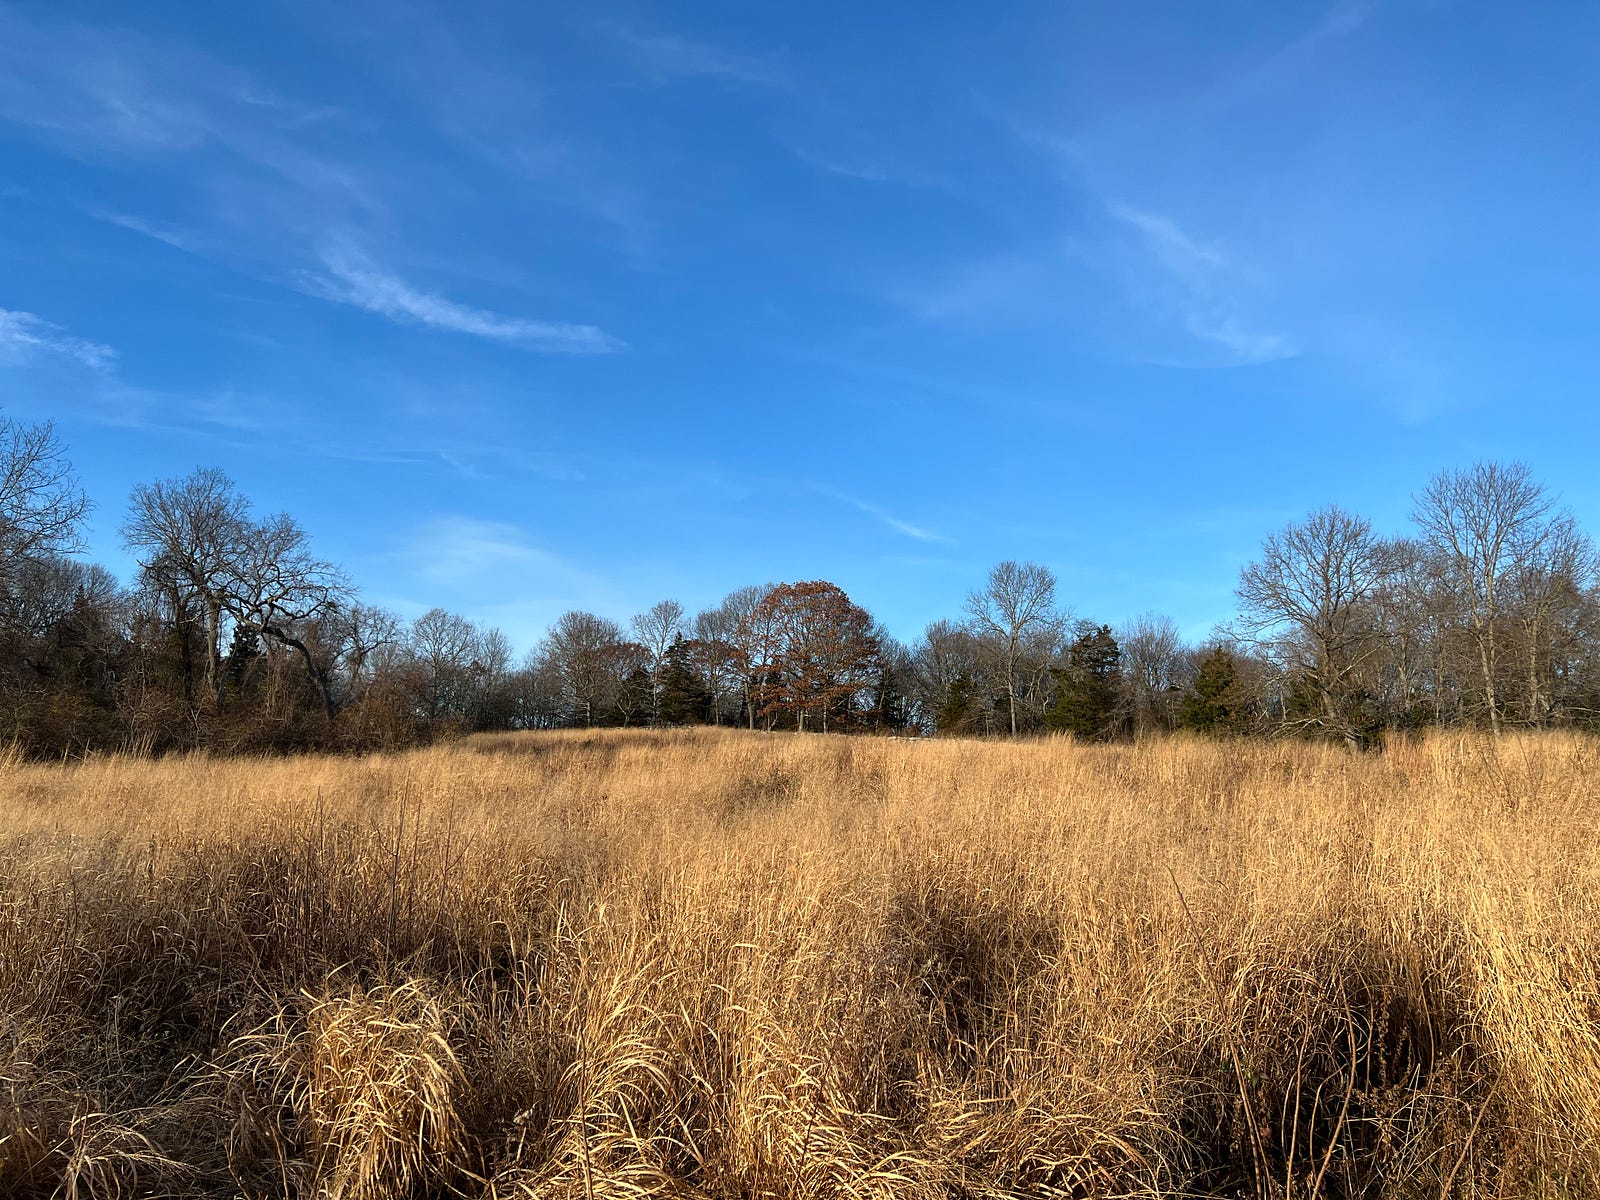 The remains of summer grasses in a fall field at Haley Farm State Park in Groton, CT under a brillient Autumn sky.